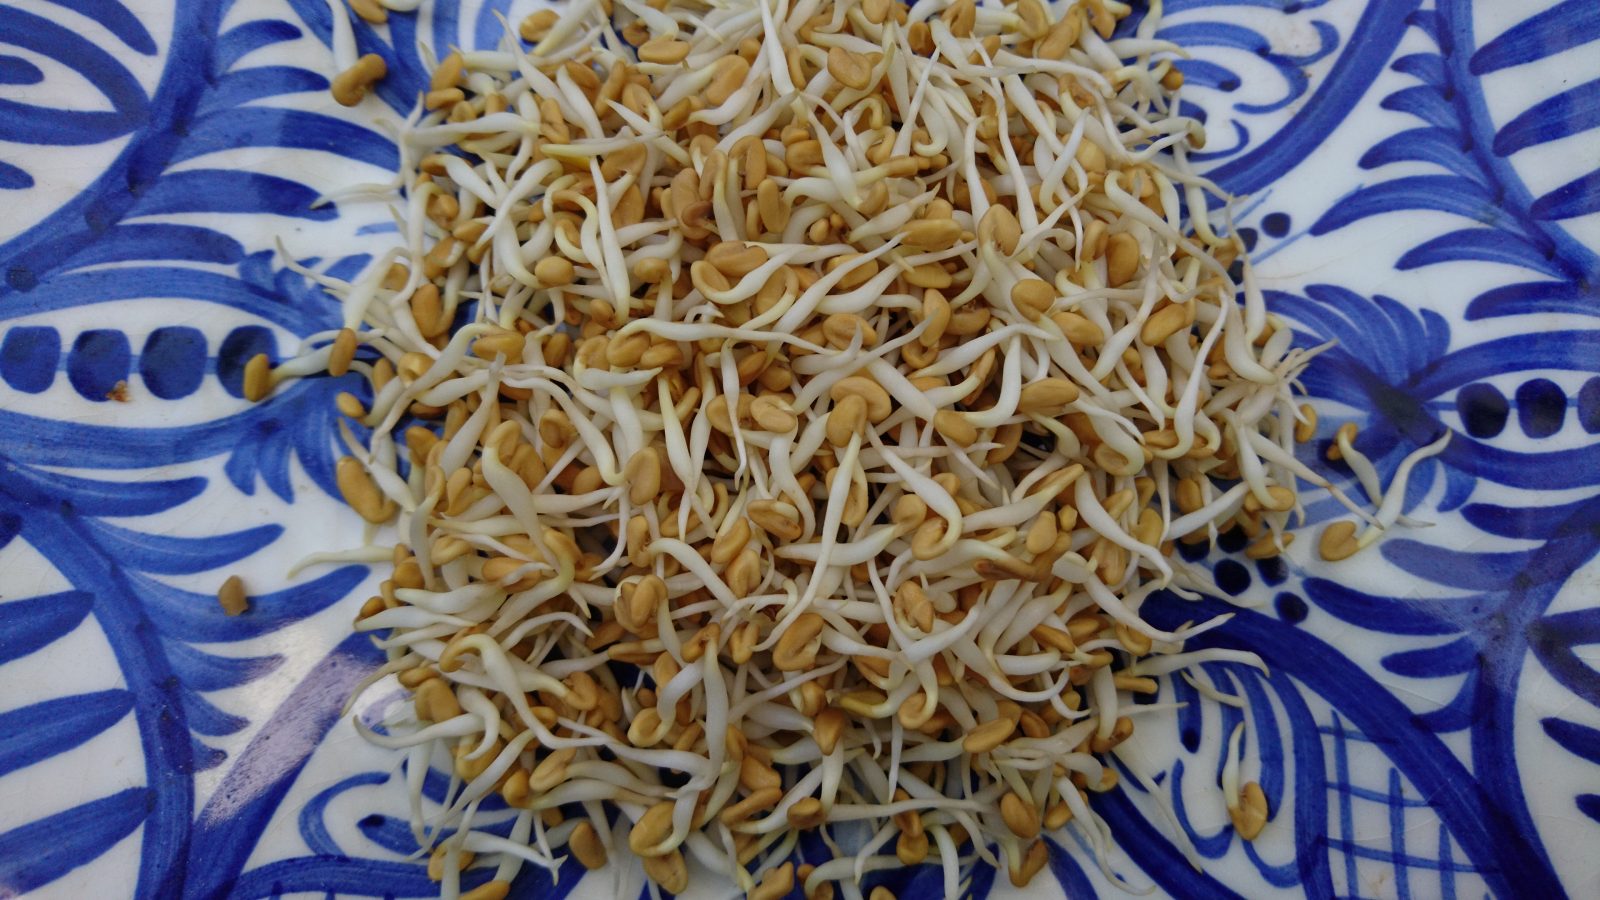 fenugreek-sprouts-camelcsa-010319